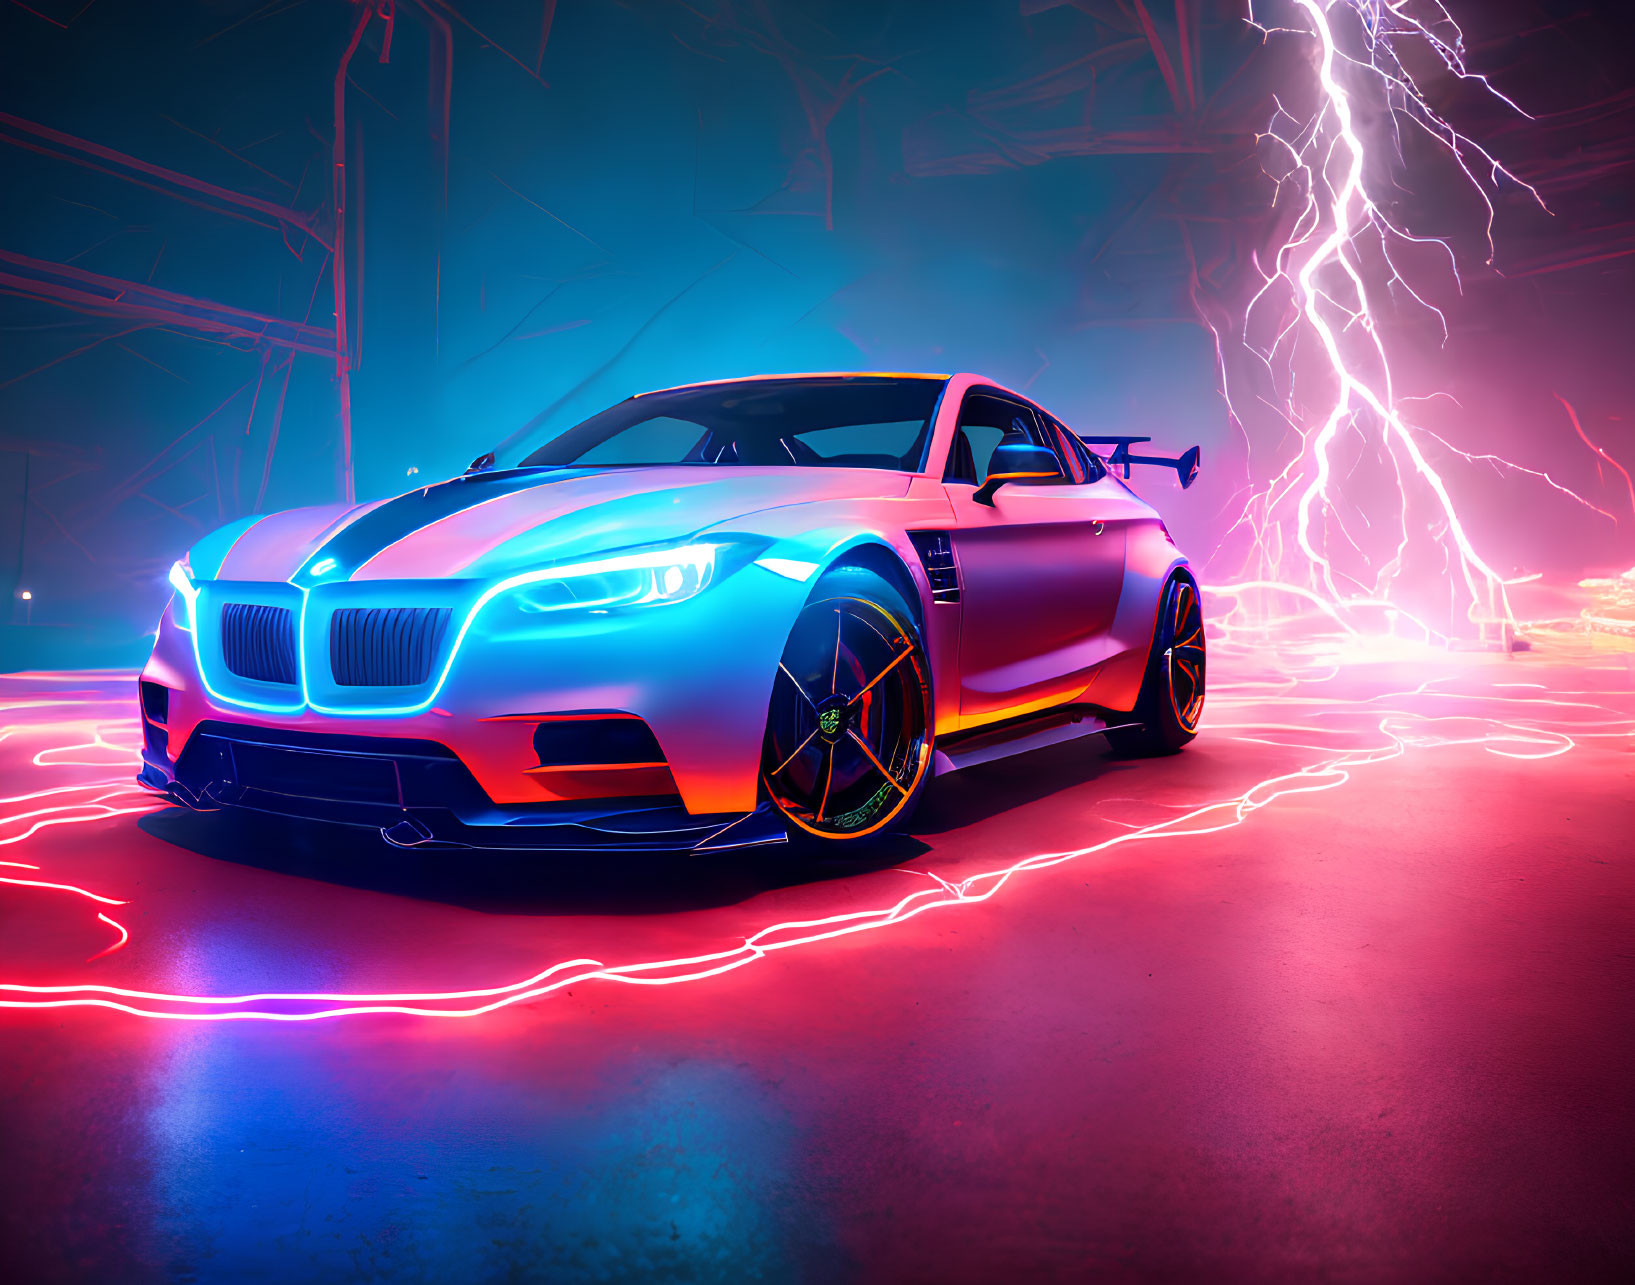 Neon Car with a Lightning